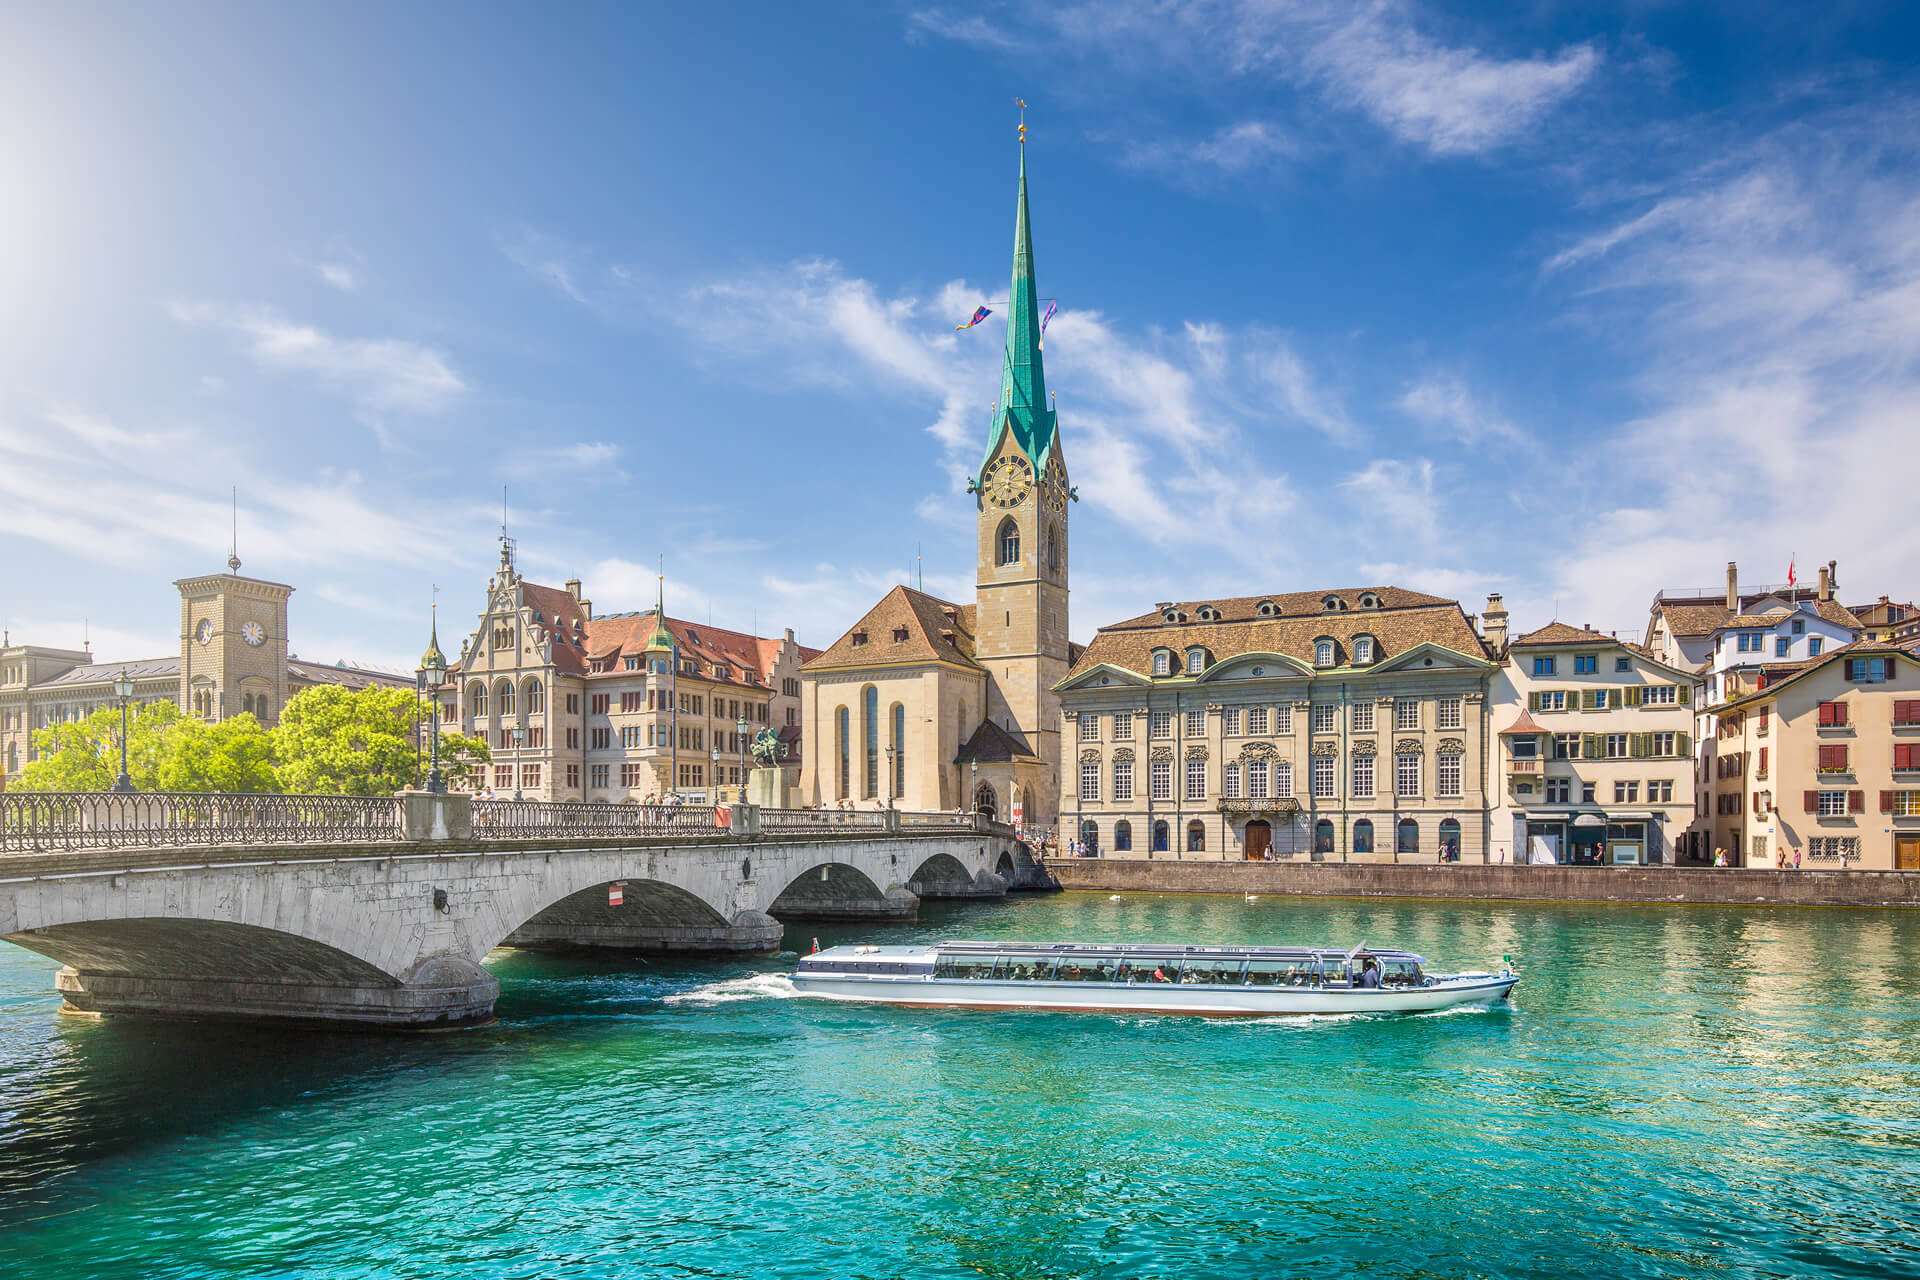 Excursion boat on river Limmat Canton of Zurich